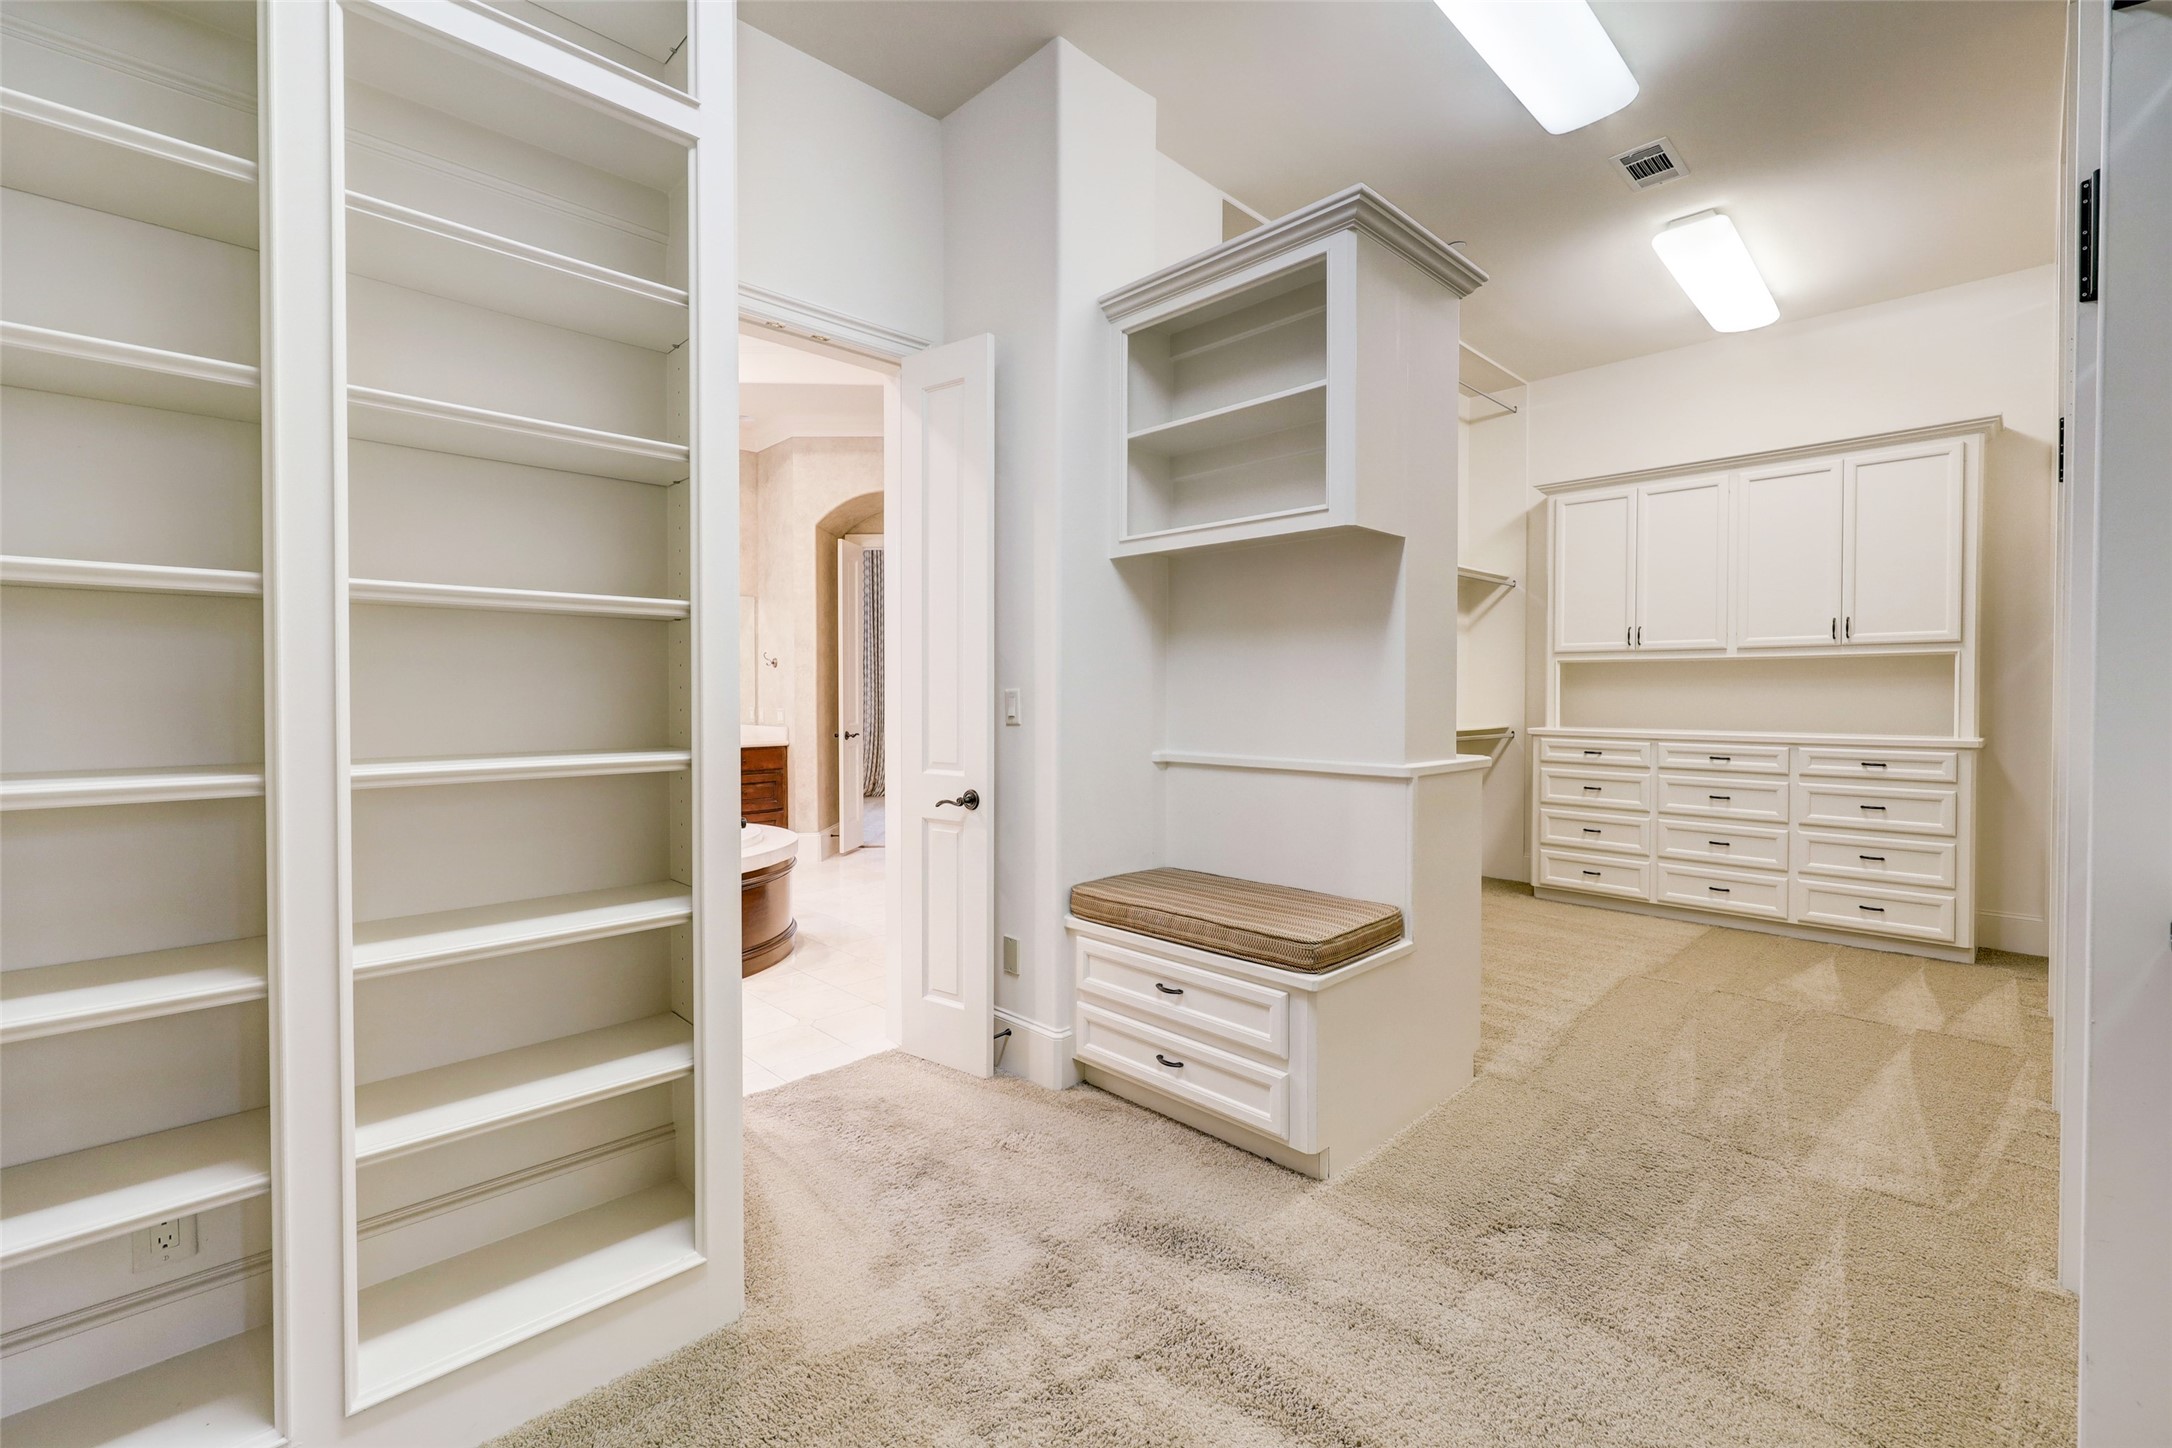 Now that you are worked out and clean, lose yourself in the massive Master Closet.